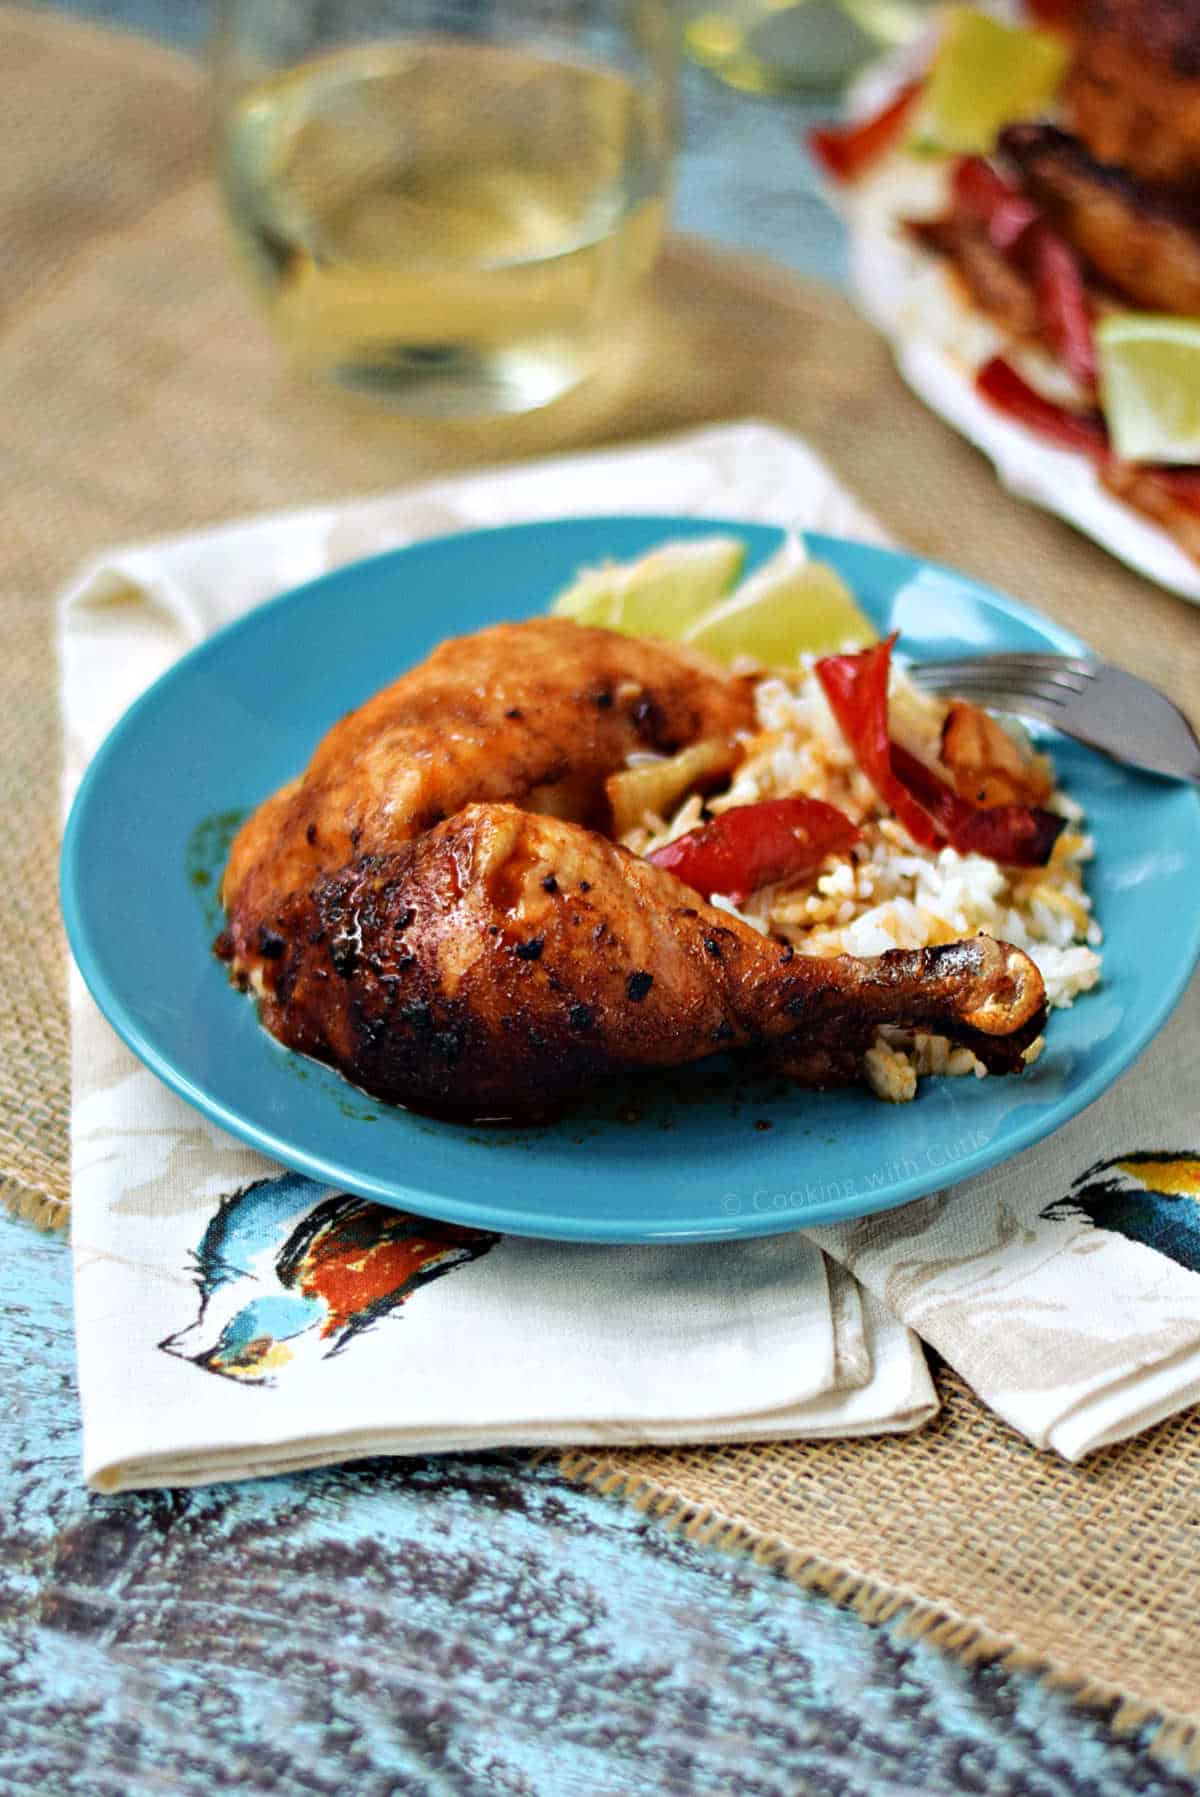 Roast chicken legs on a bed of rice.